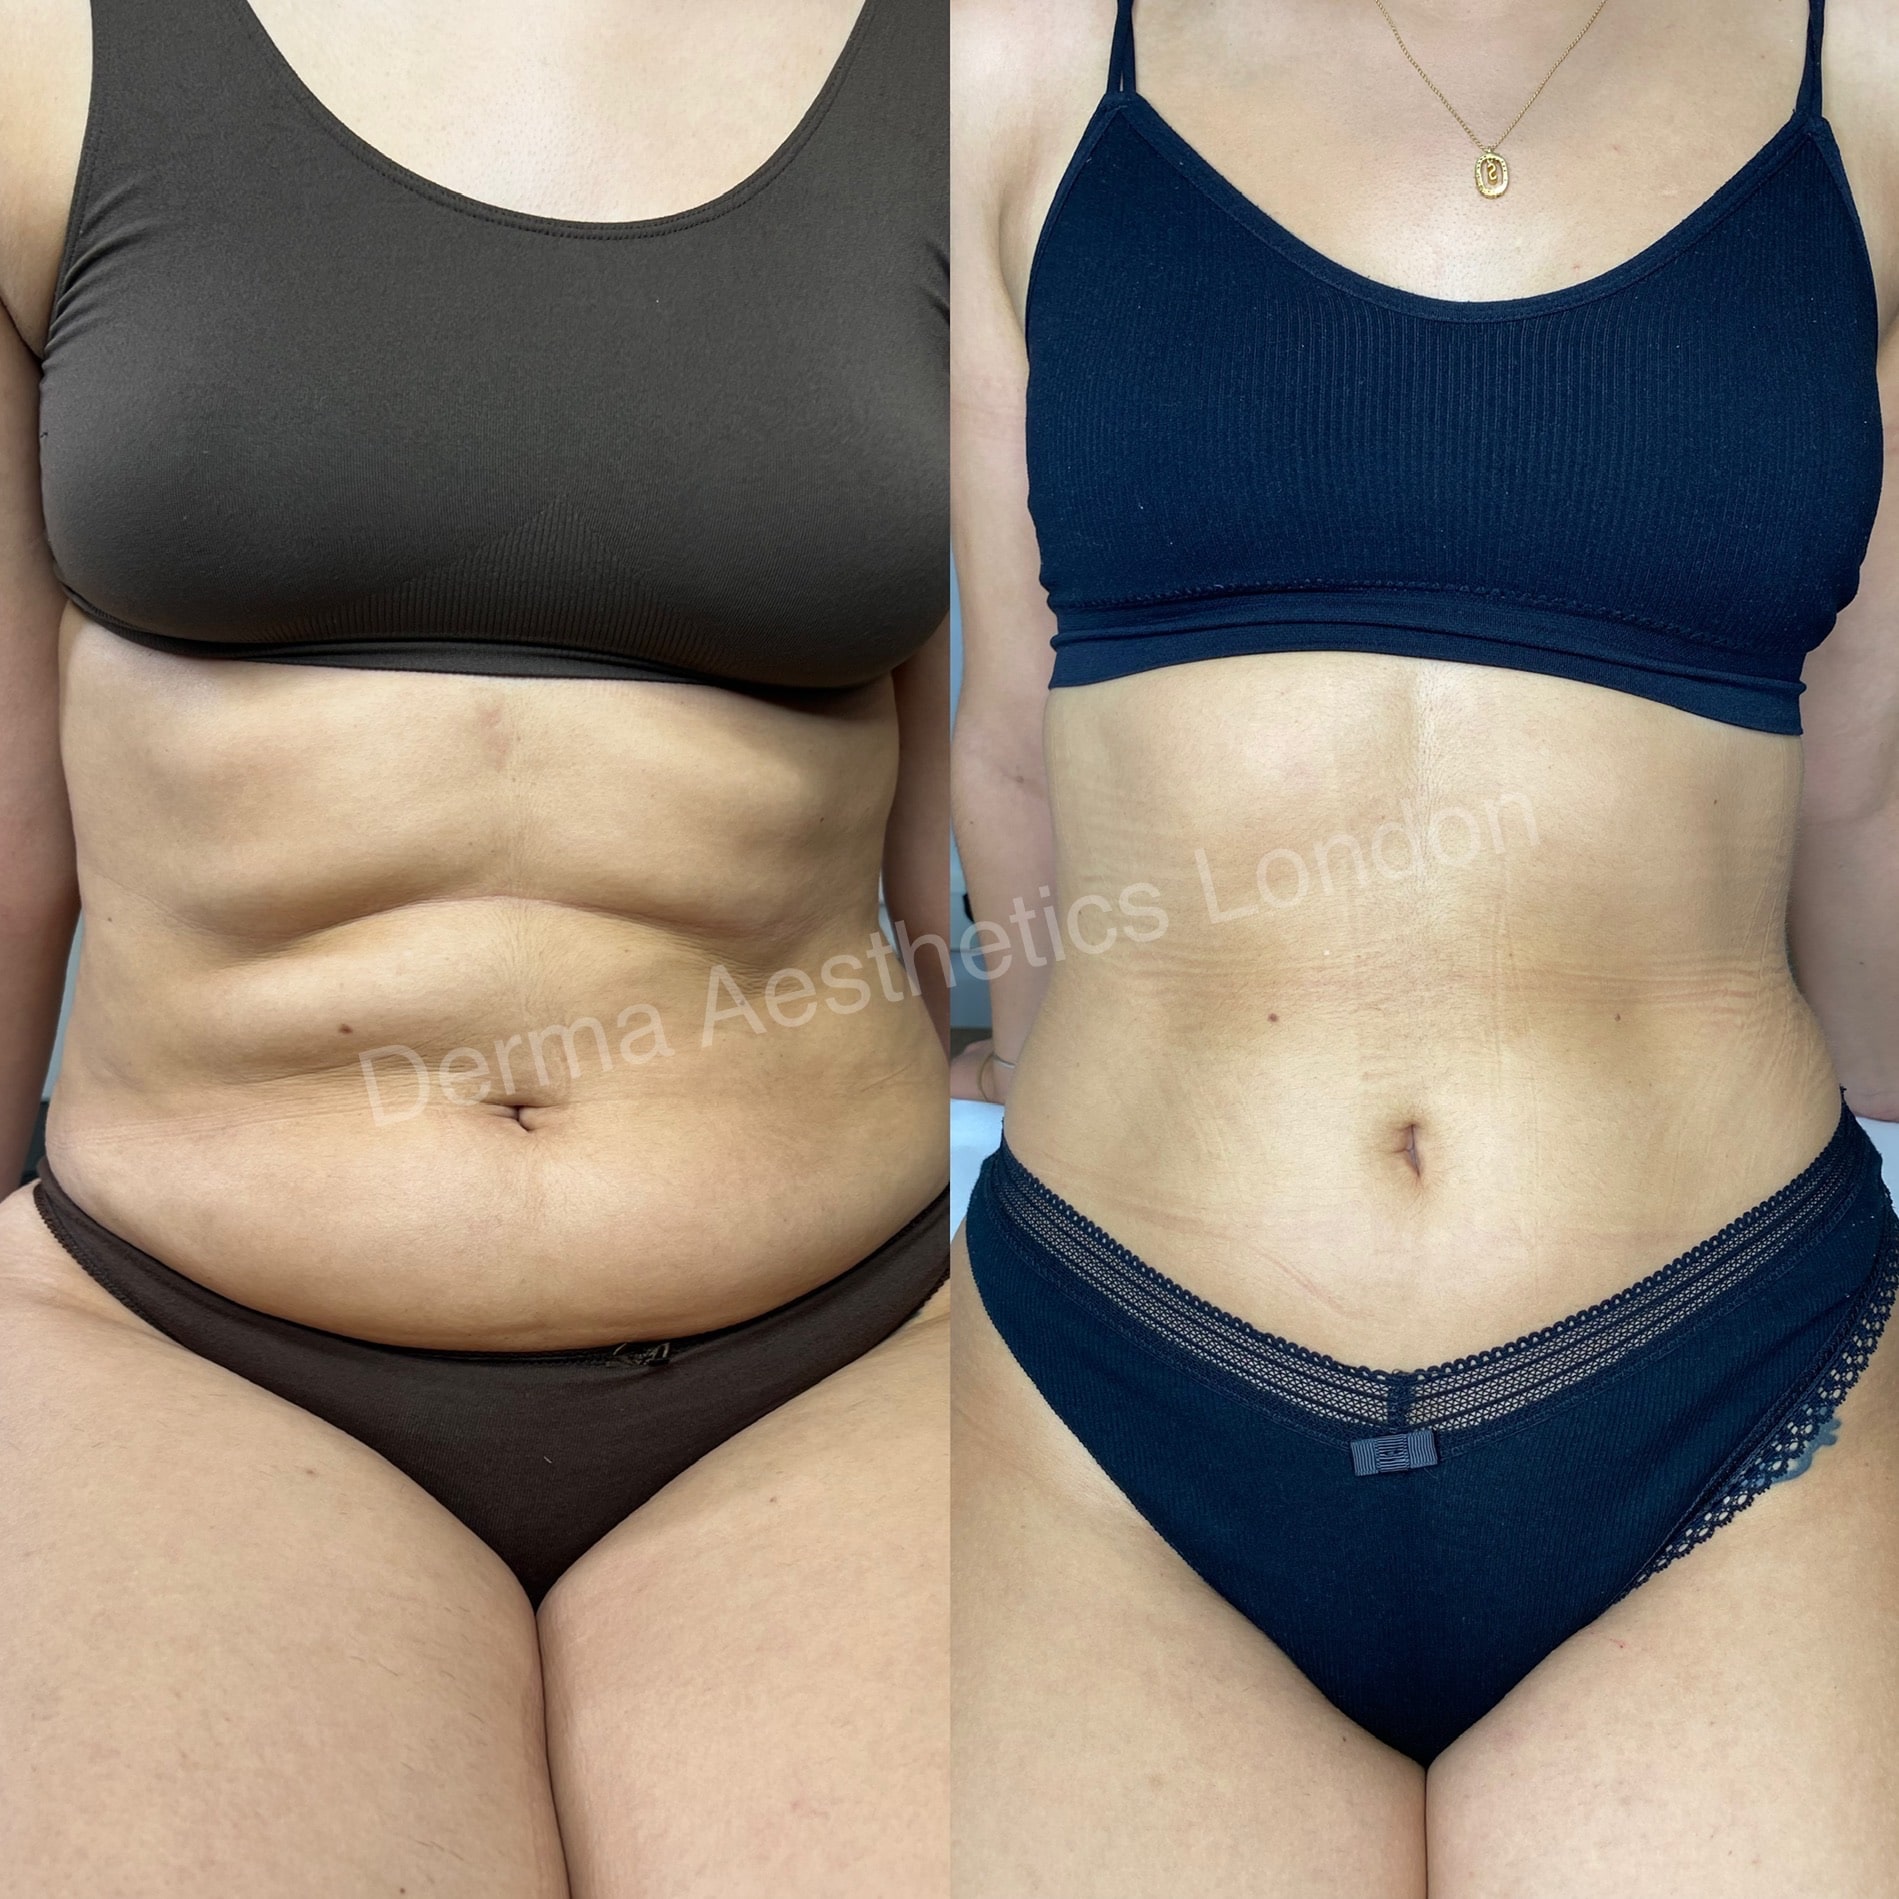 Before and After Fat Dissolving Injections 2